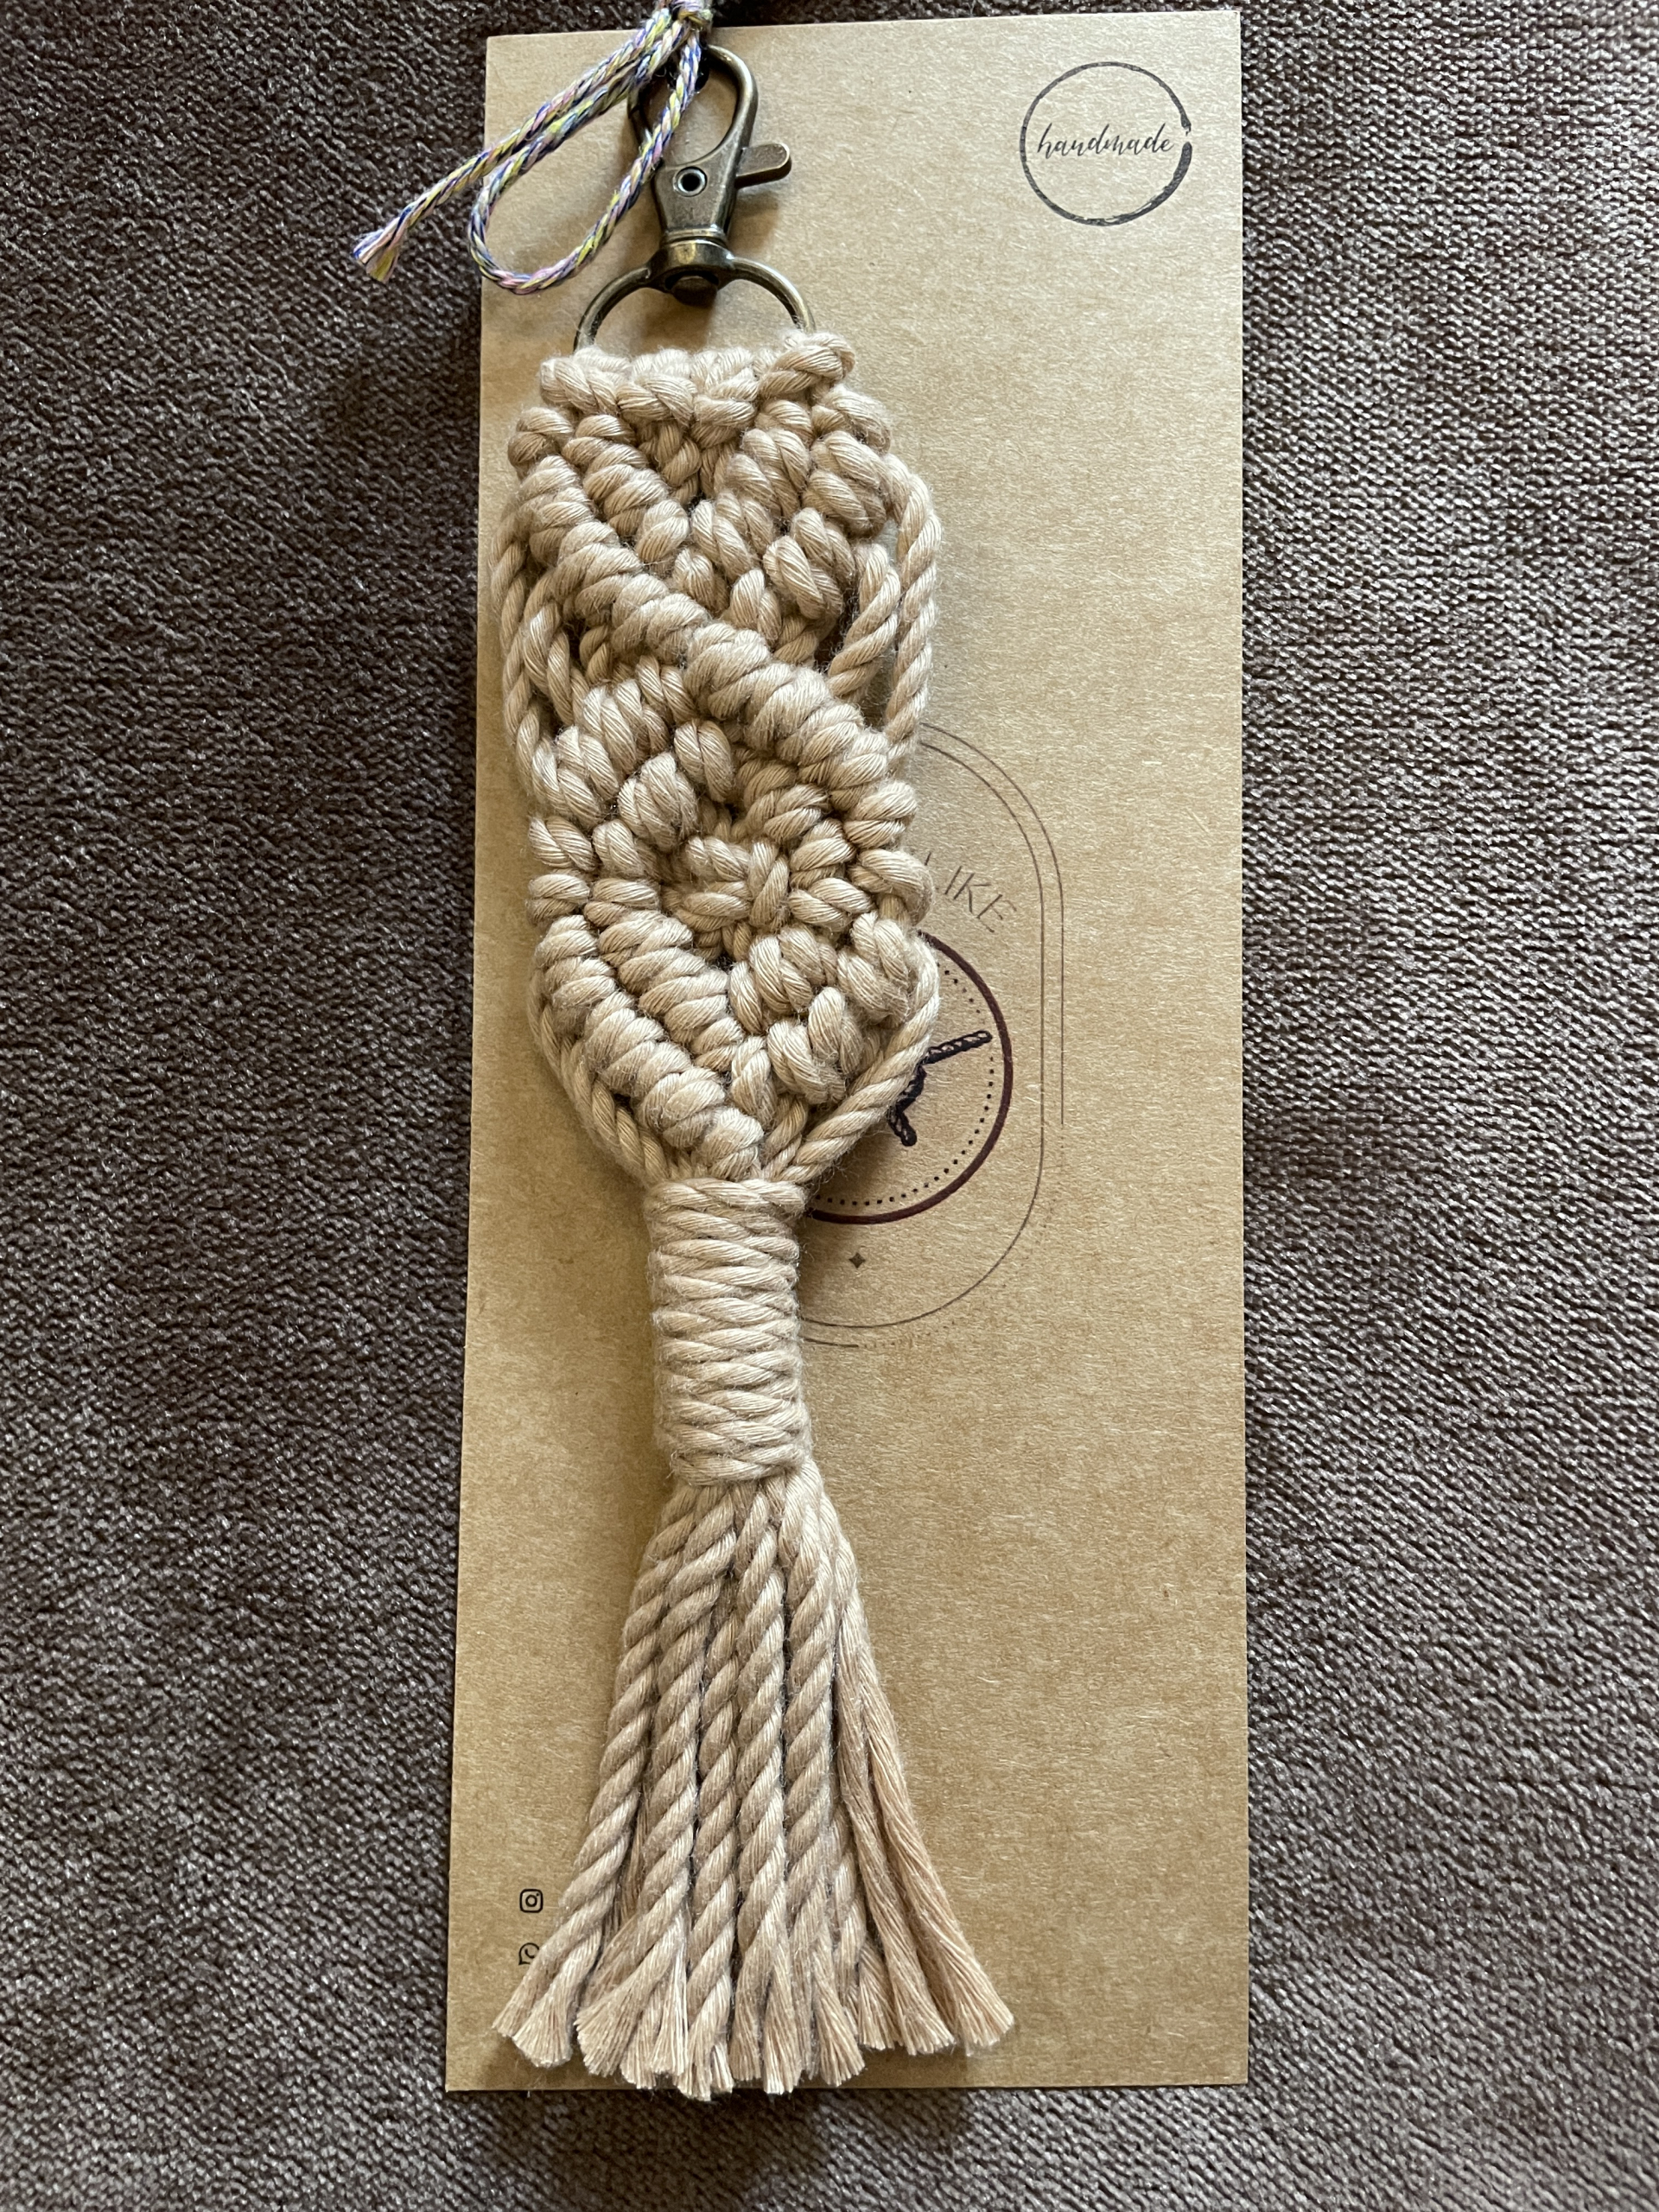 Handcrafted Knotted Natural Macrame Cotton Key Chain with lobster clasp VARIED